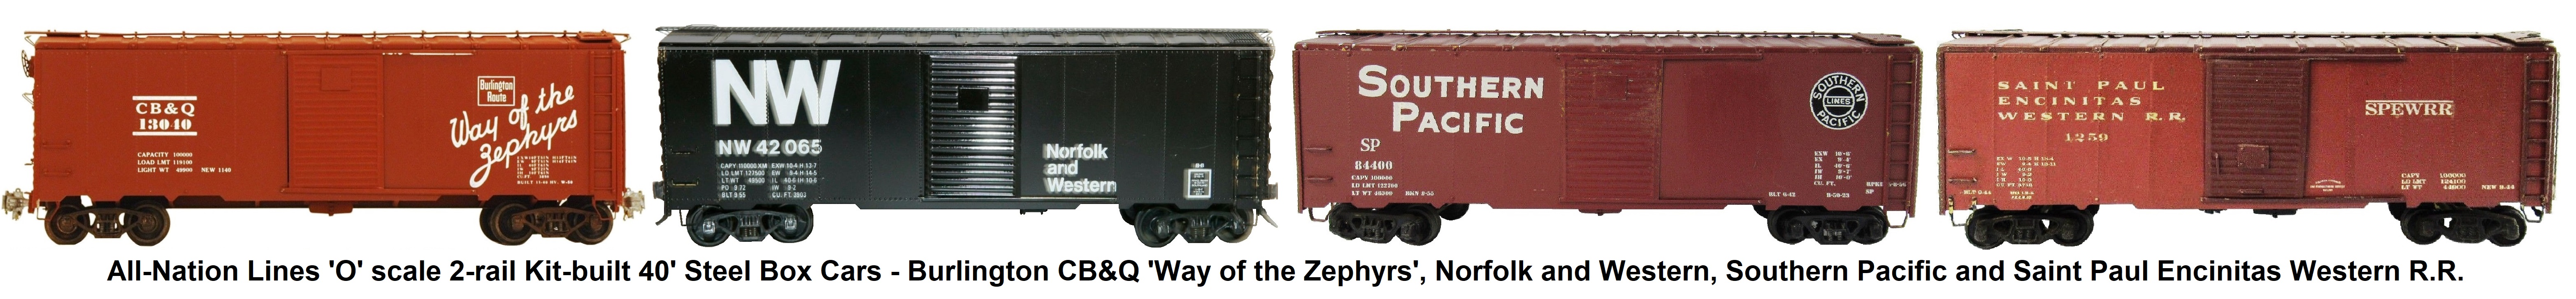 All-Nation 'O' scale 40' Steel Kit-built Box Cars - #3625 Burlington CB&Q 'Way of the Zephyrs', #6624 Norfolk and Western (black), #3653 Southern Pacific, and Saint Paul Encinitas Western R.R. 